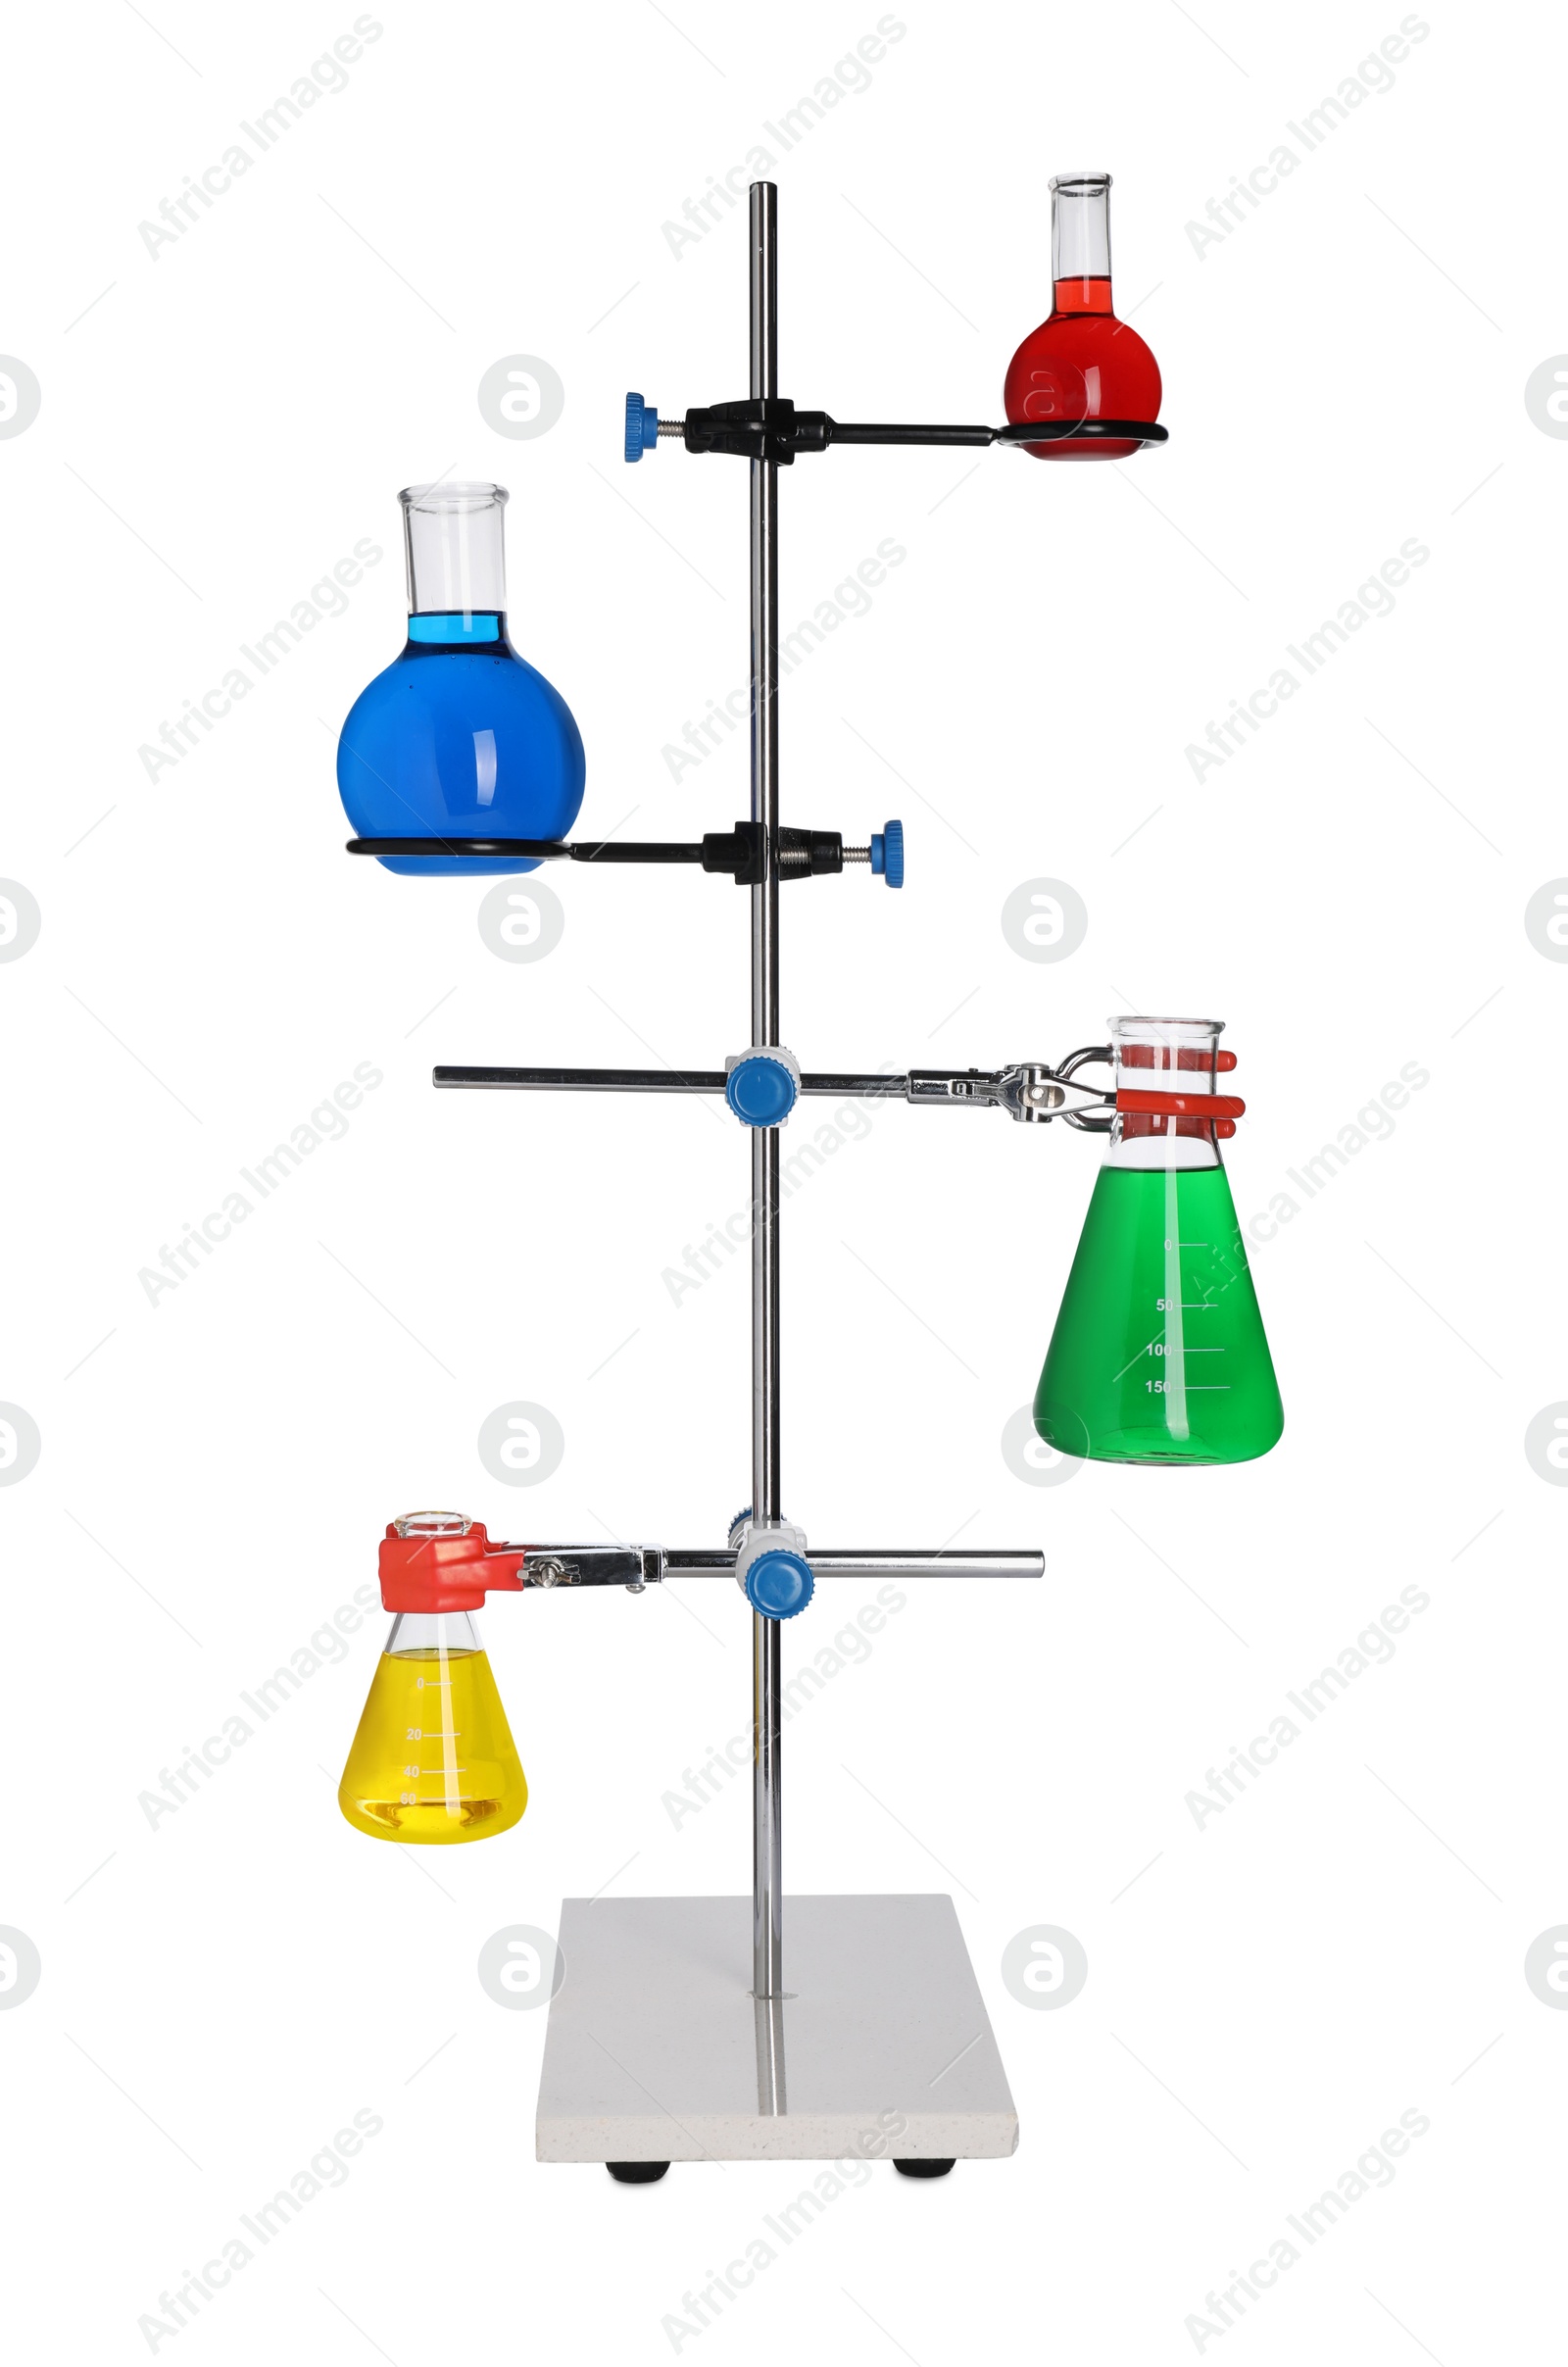 Photo of Retort stand with flask of colorful liquids isolated on white